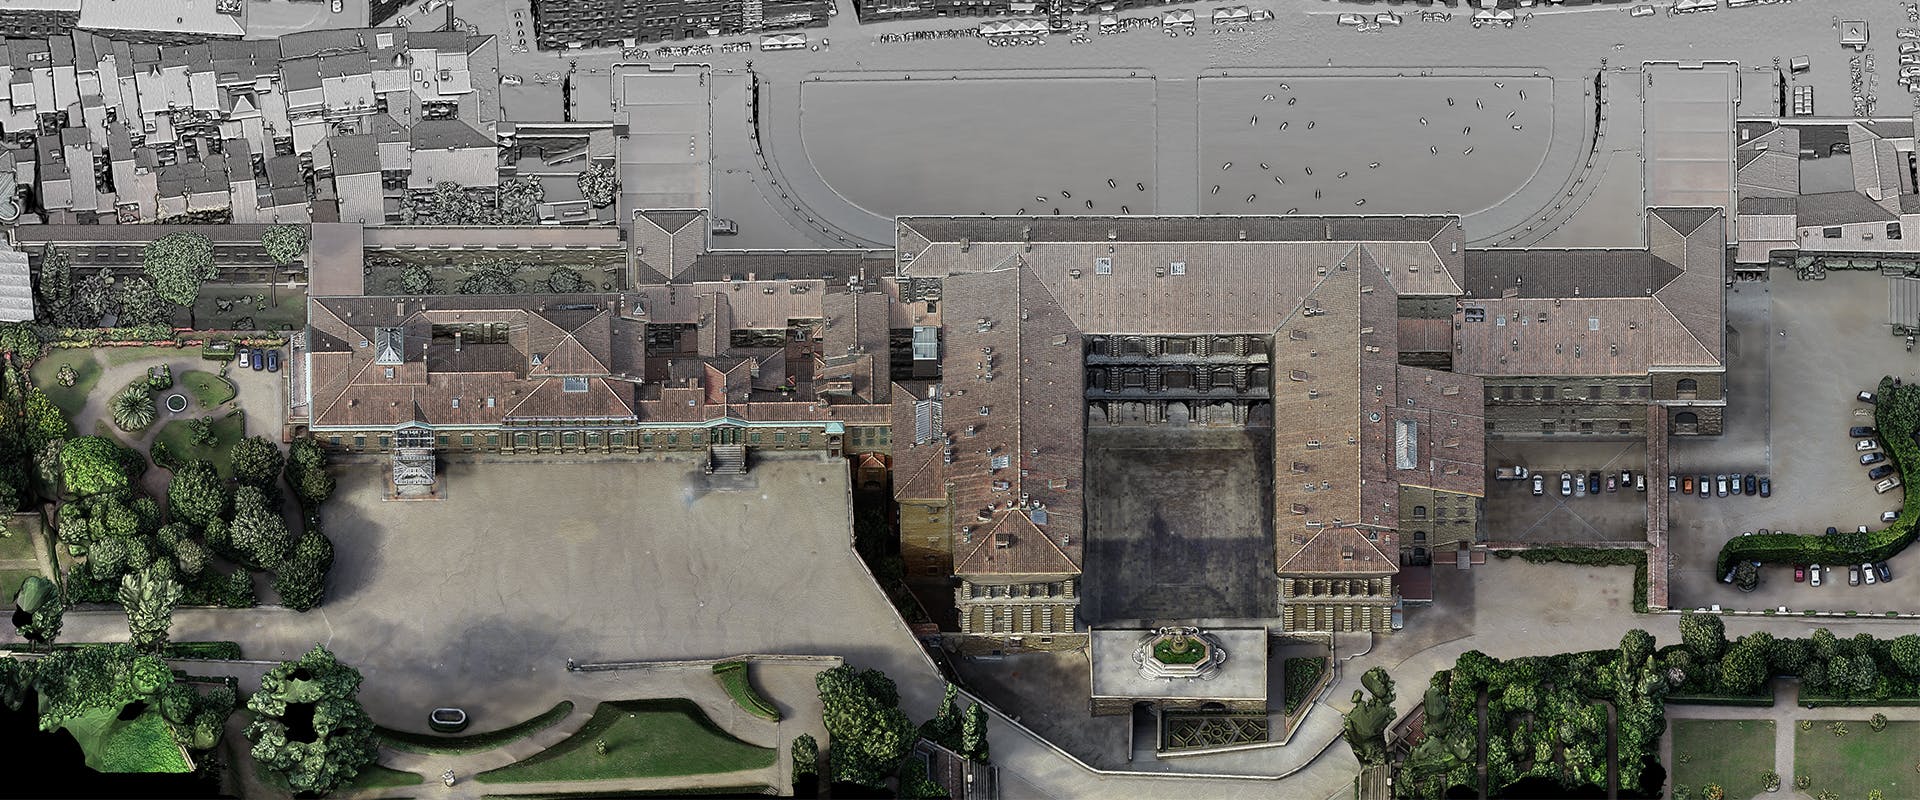 A brand new 3D model for Pitti Palace